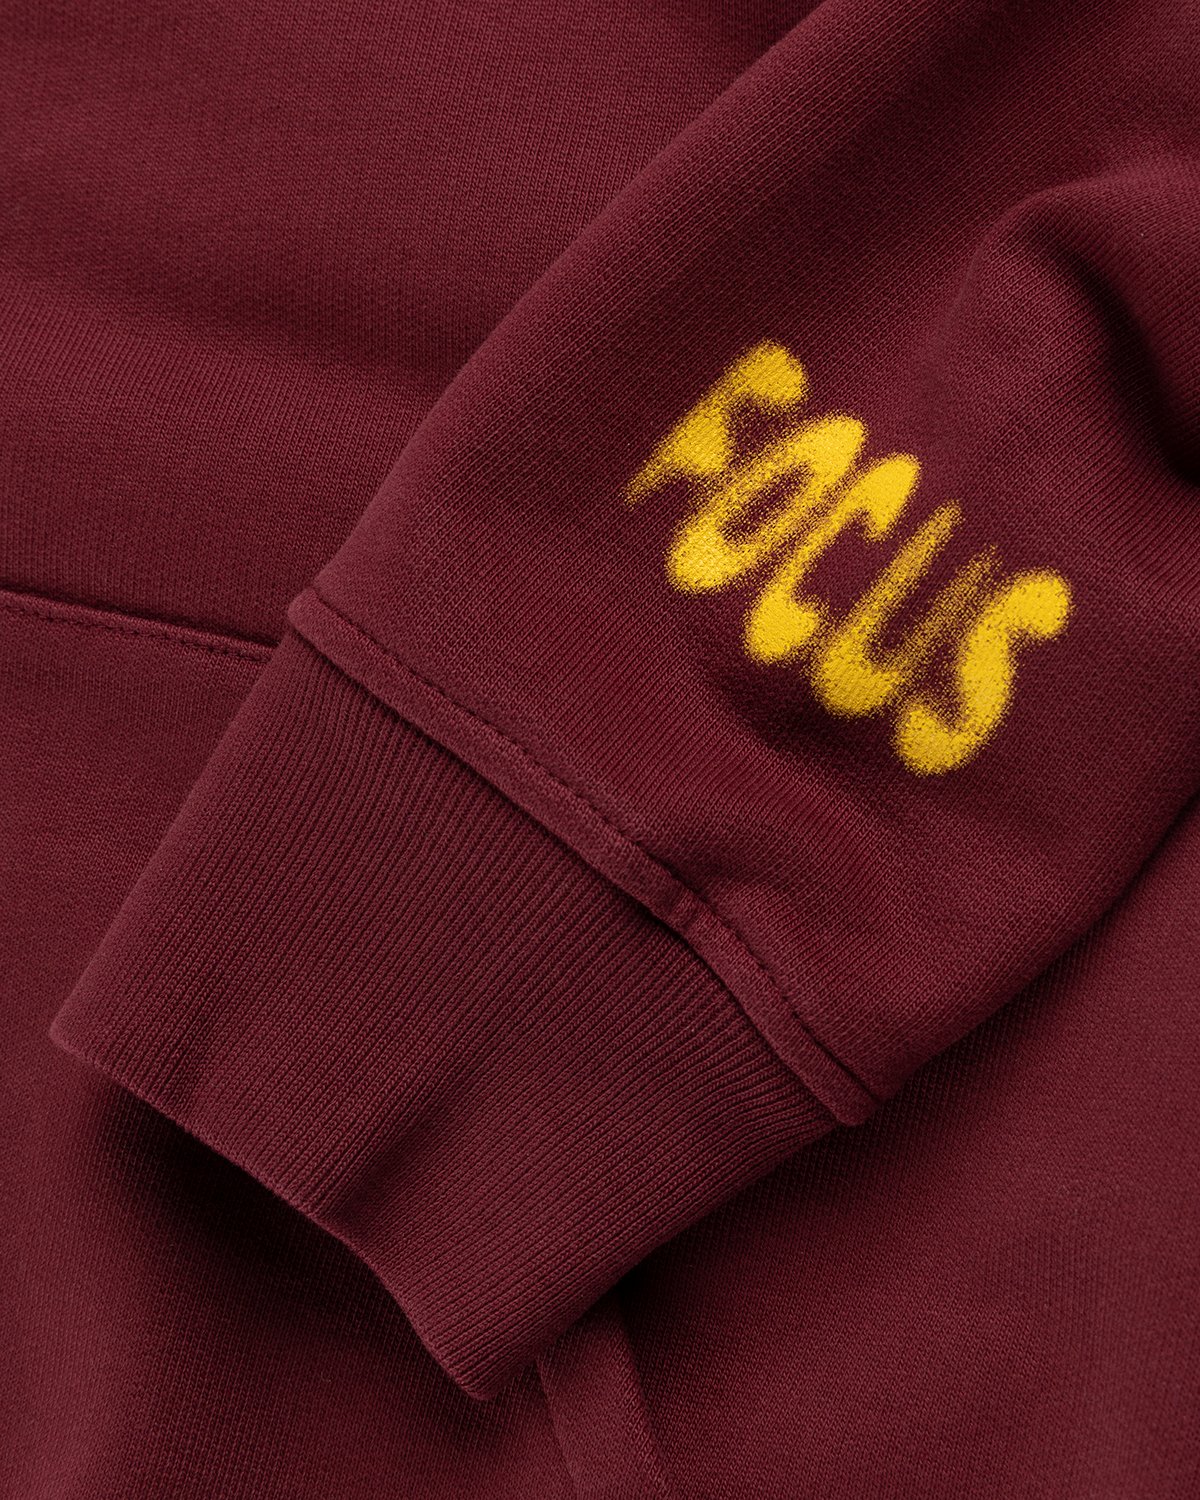 Highsnobiety - HS Sports Focus Hoodie Bordeaux - Clothing - Red - Image 6